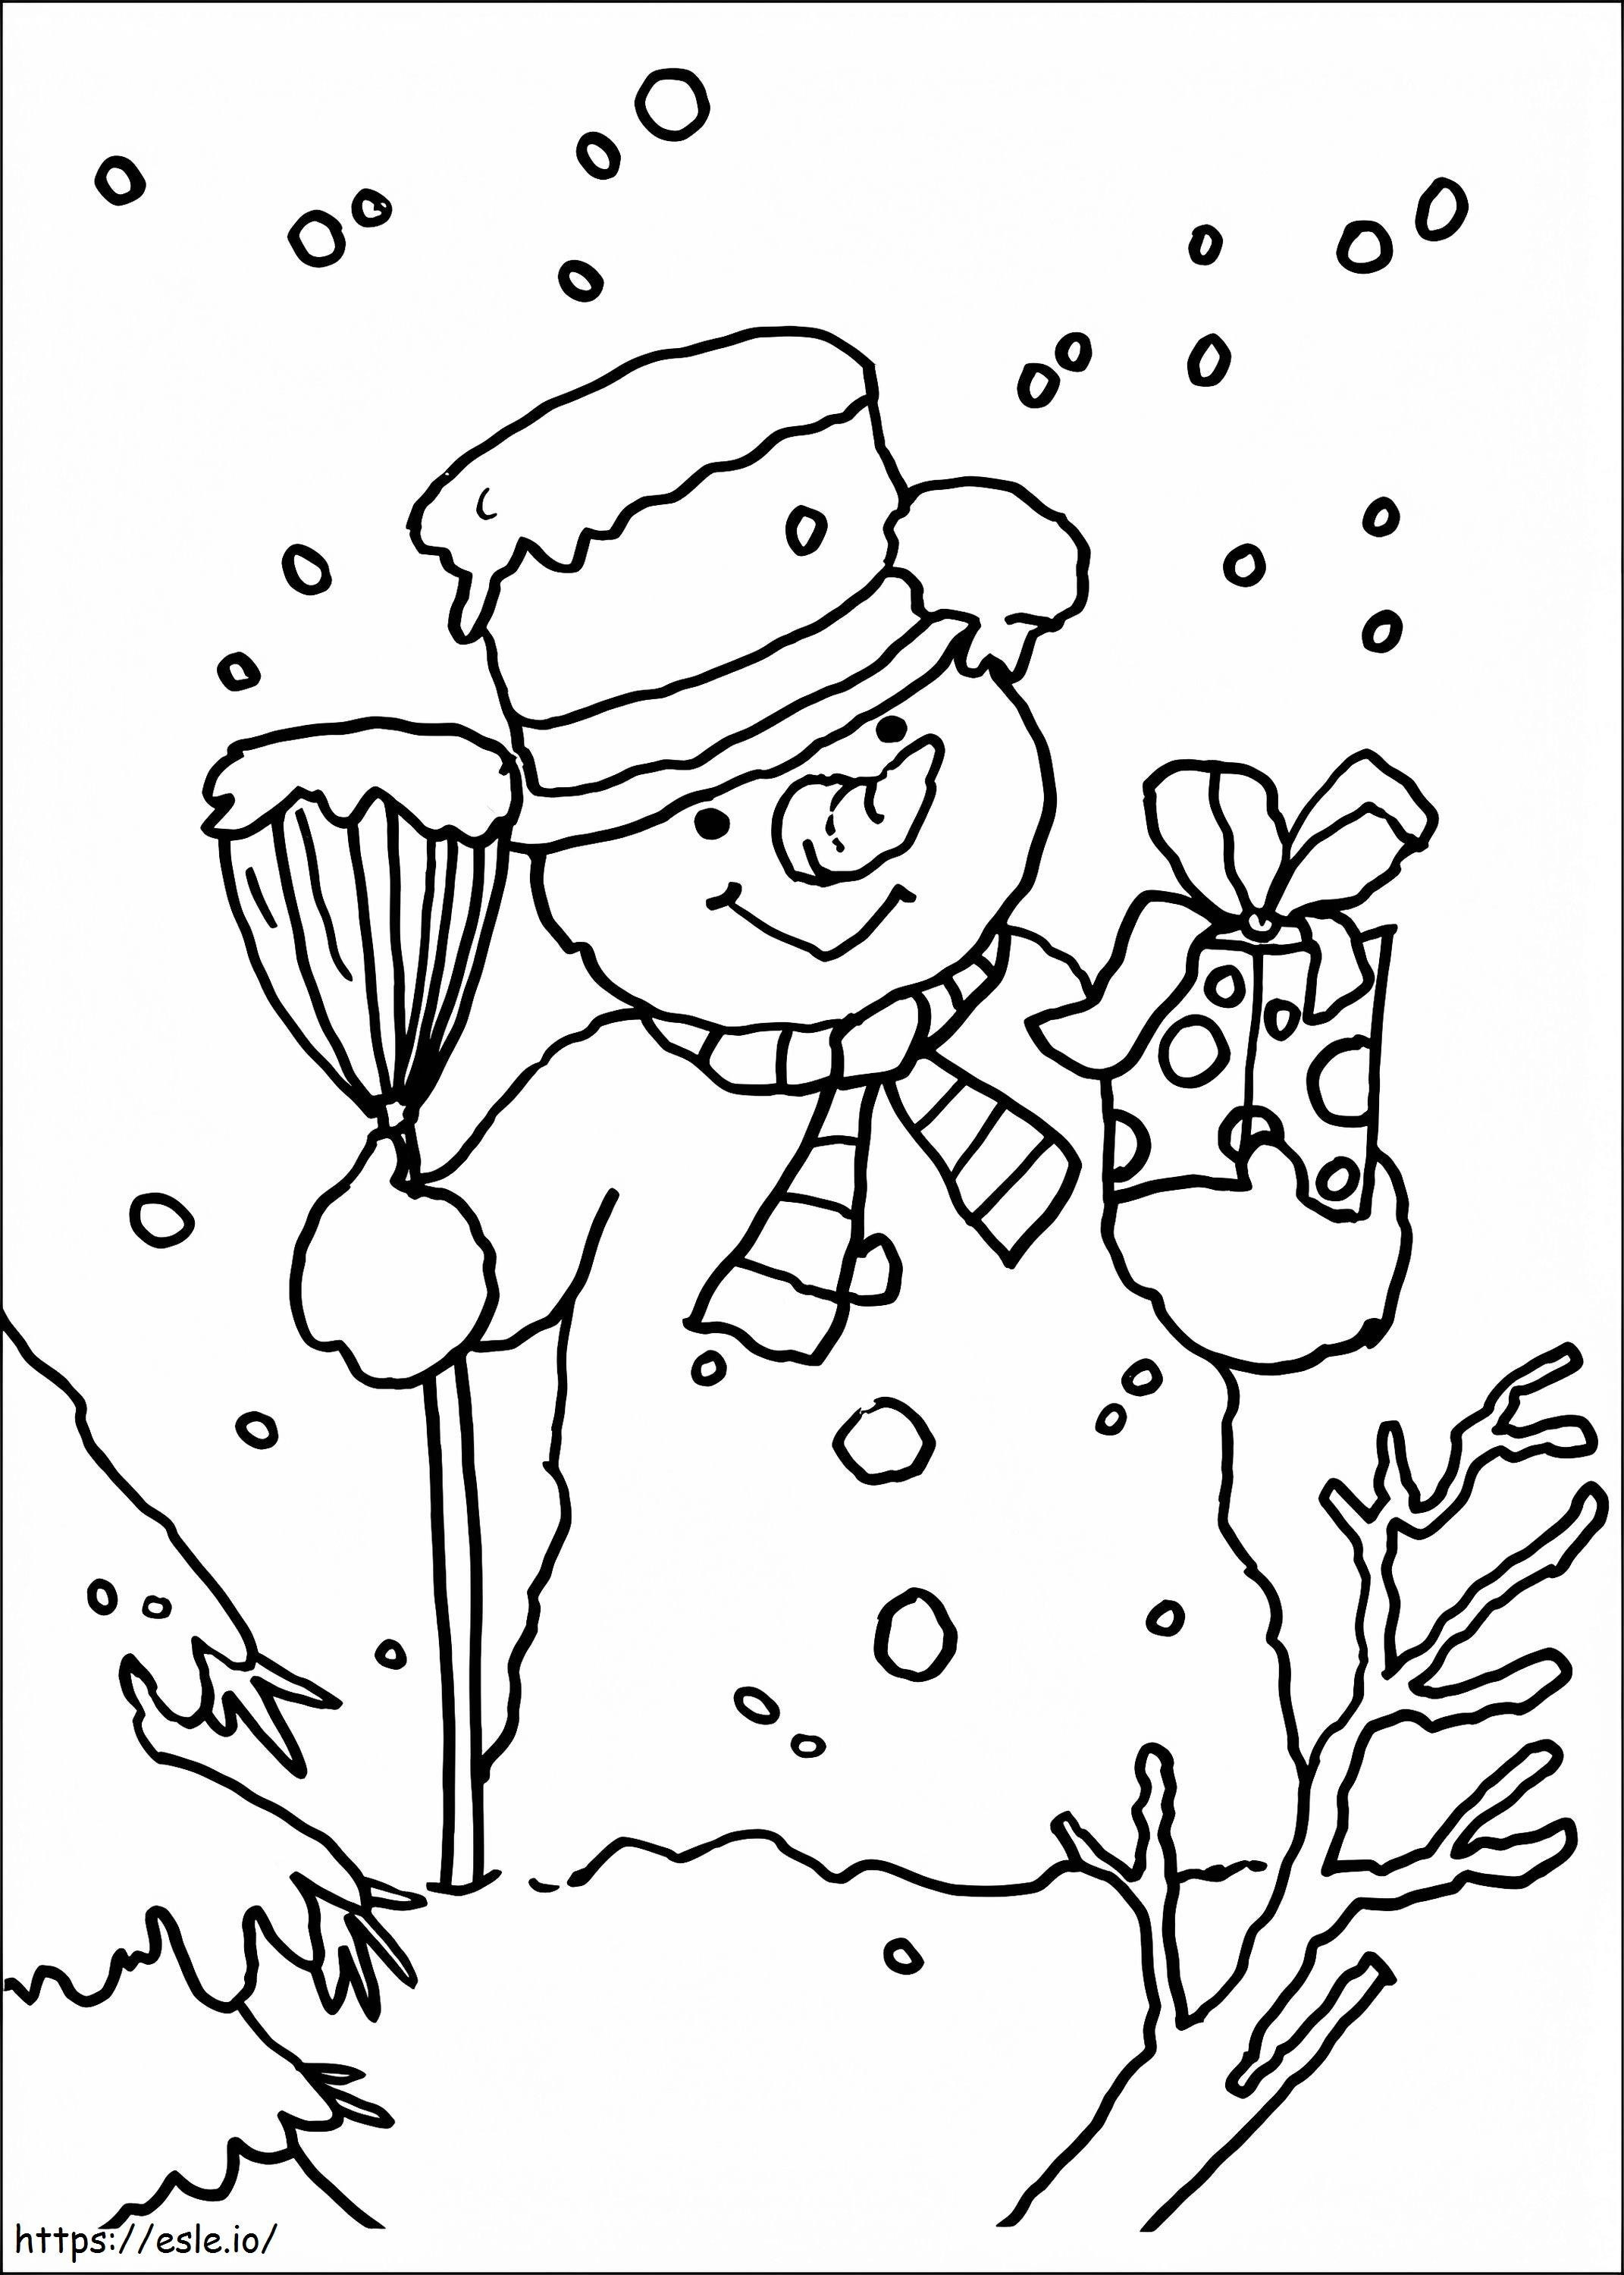 1534391418 Snowman With Gift coloring page